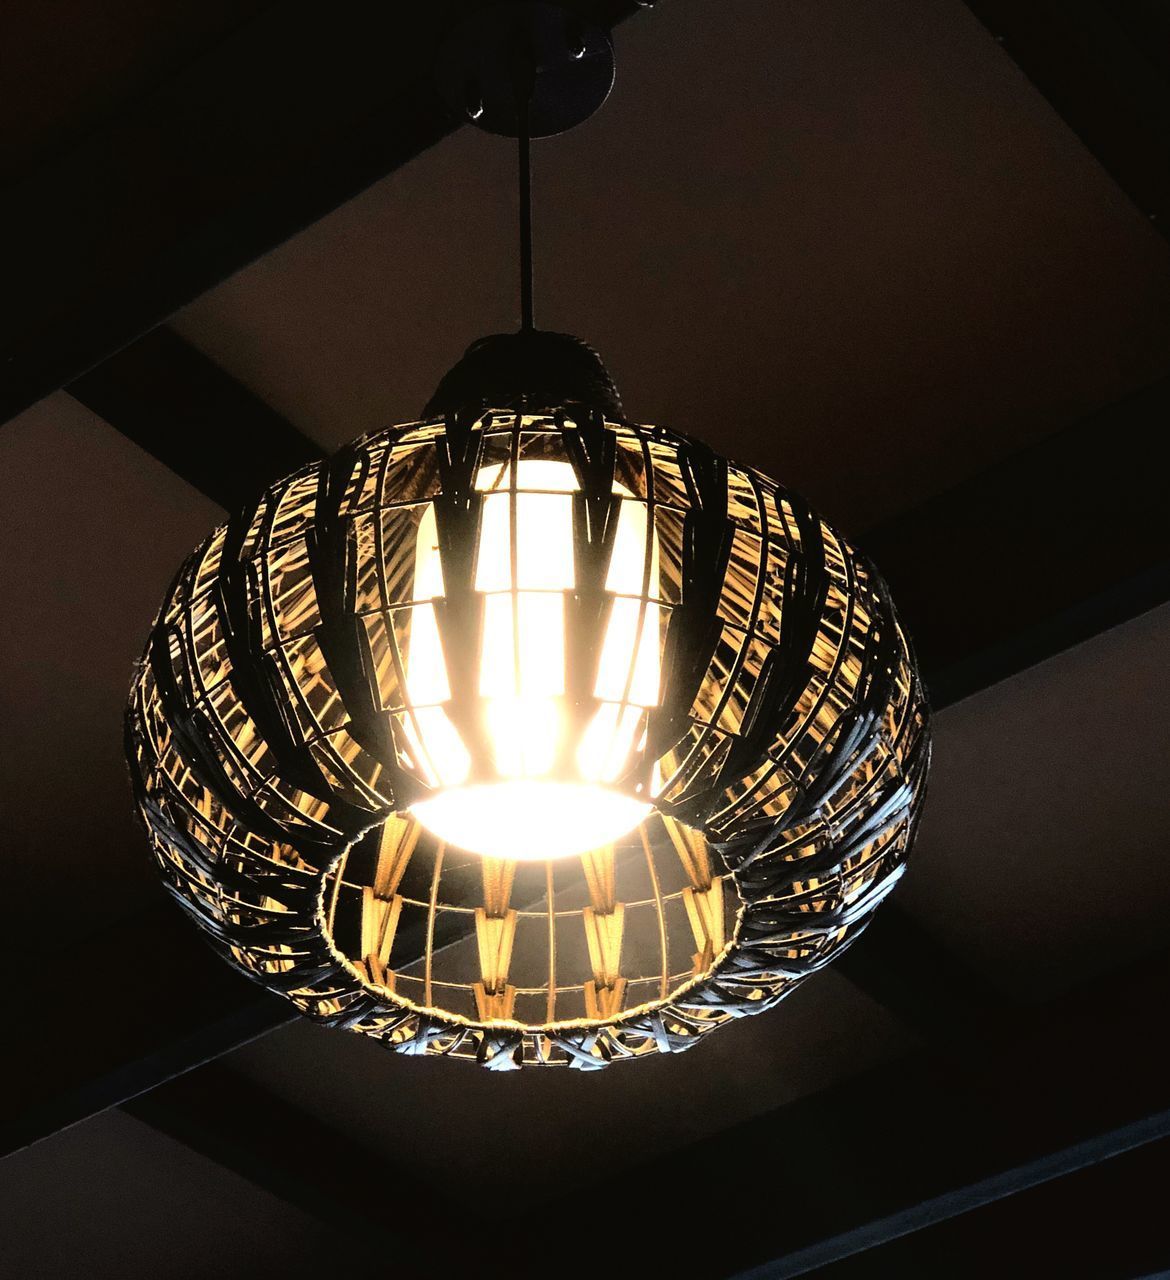 LOW ANGLE VIEW OF ILLUMINATED PENDANT LIGHT HANGING FROM CEILING